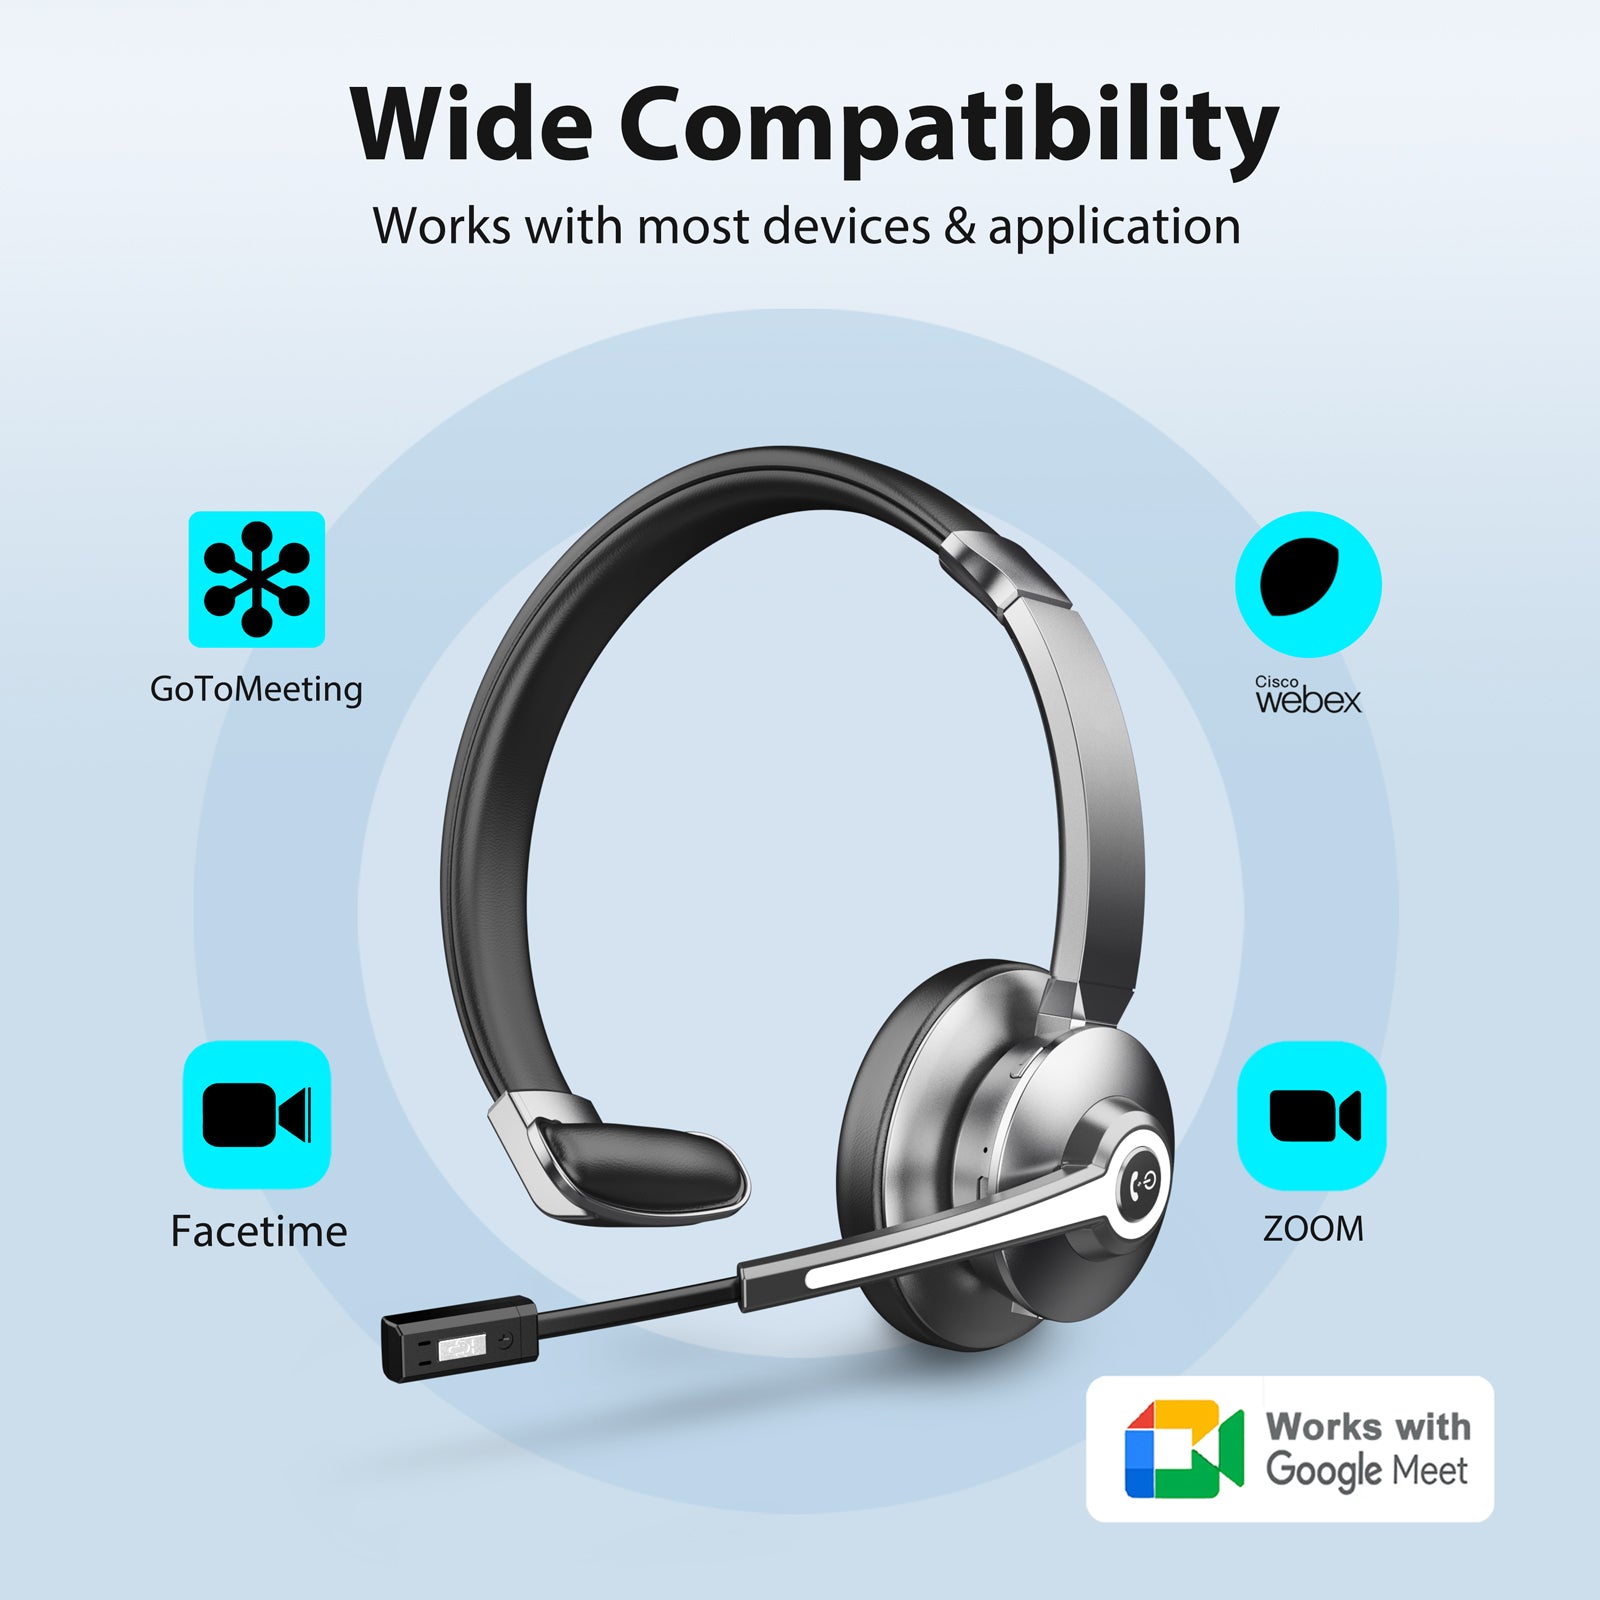 Wide compatibility,Works with most devices & application,Goto meeting,Webex,Facetime,Zoom,Works with google meet.